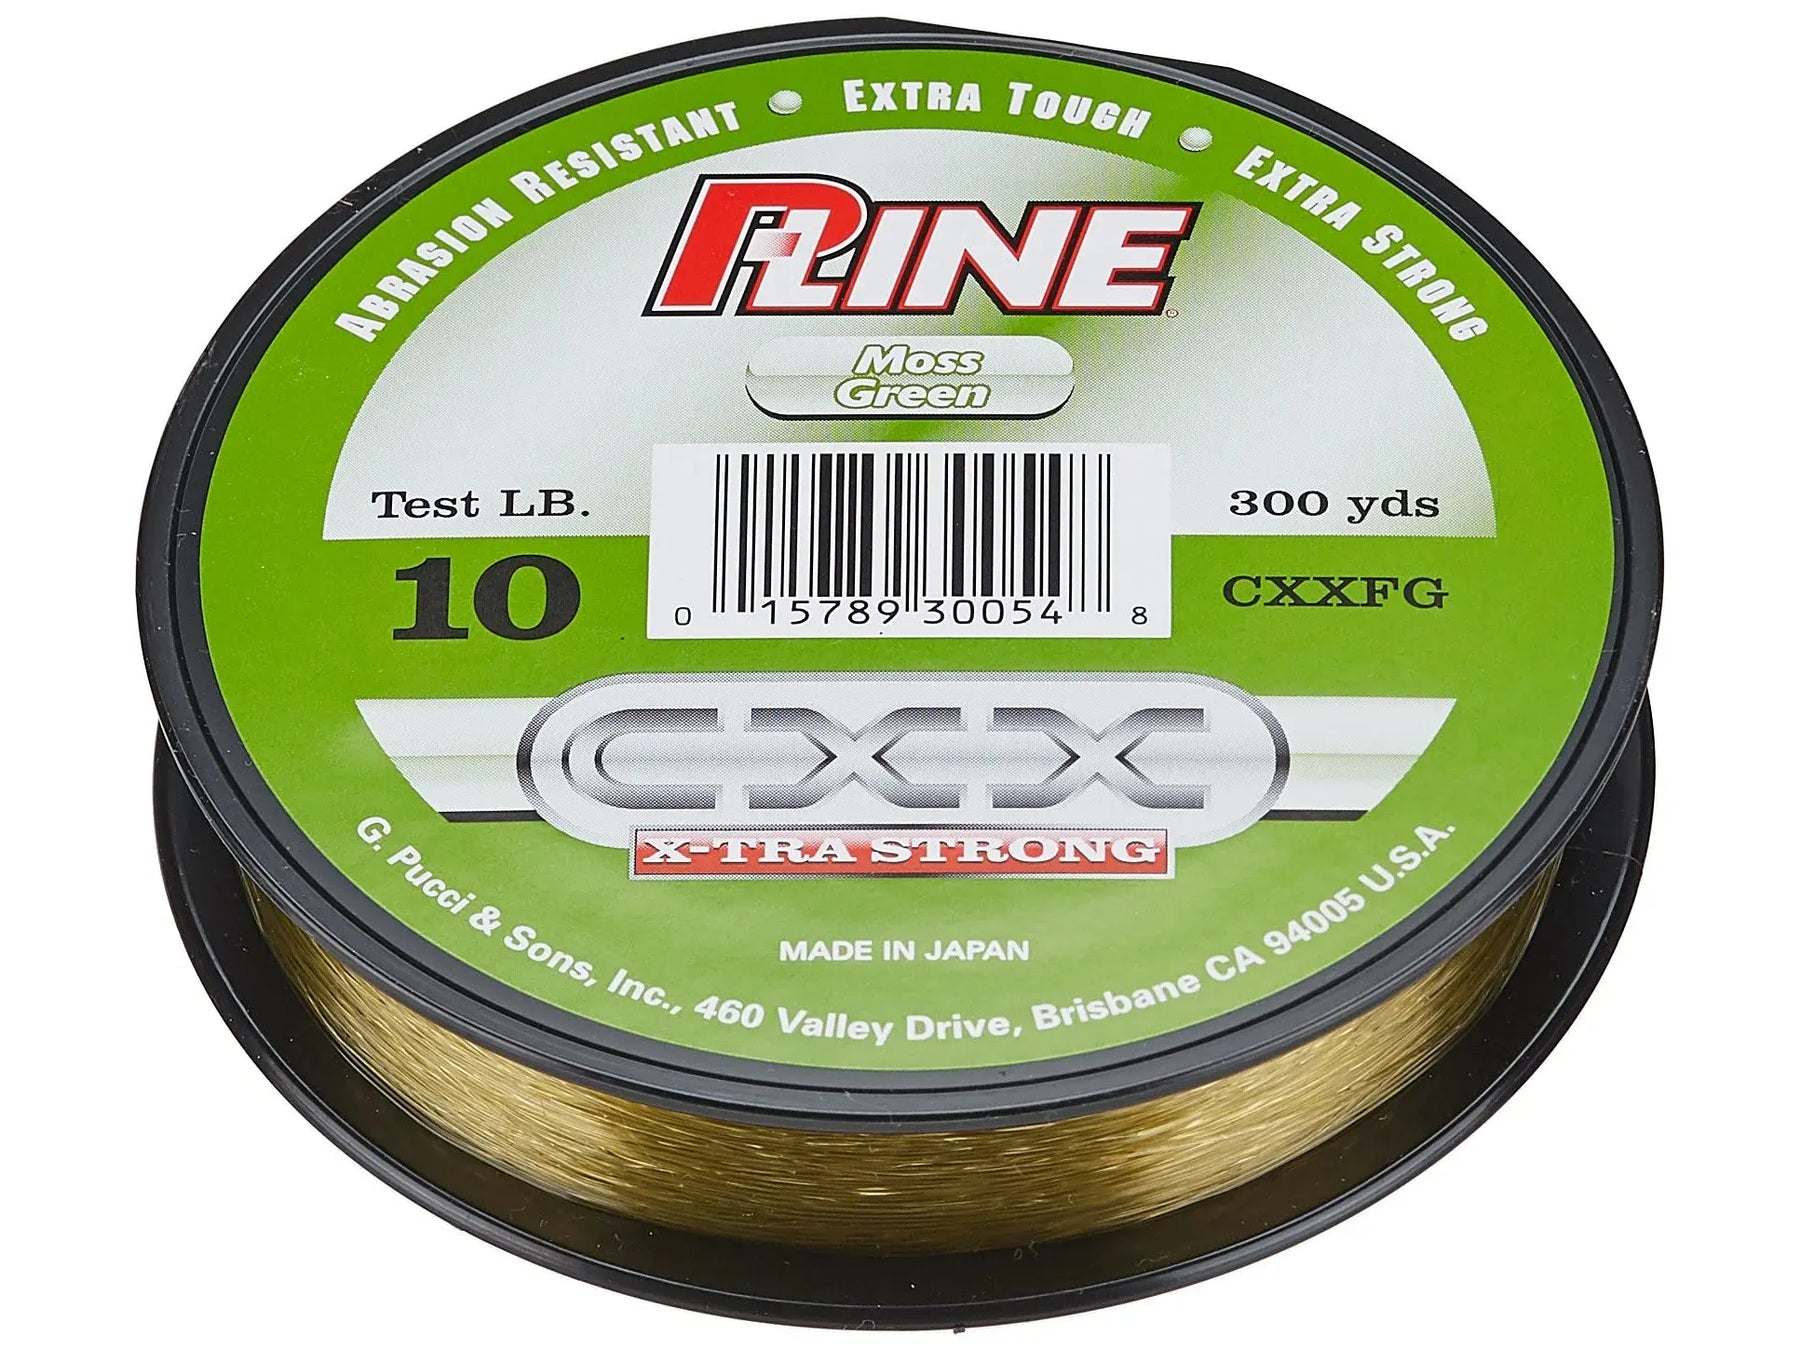 P-Line Fluorocarbon Fishing Line Price in India - Buy P-Line Fluorocarbon  Fishing Line online at